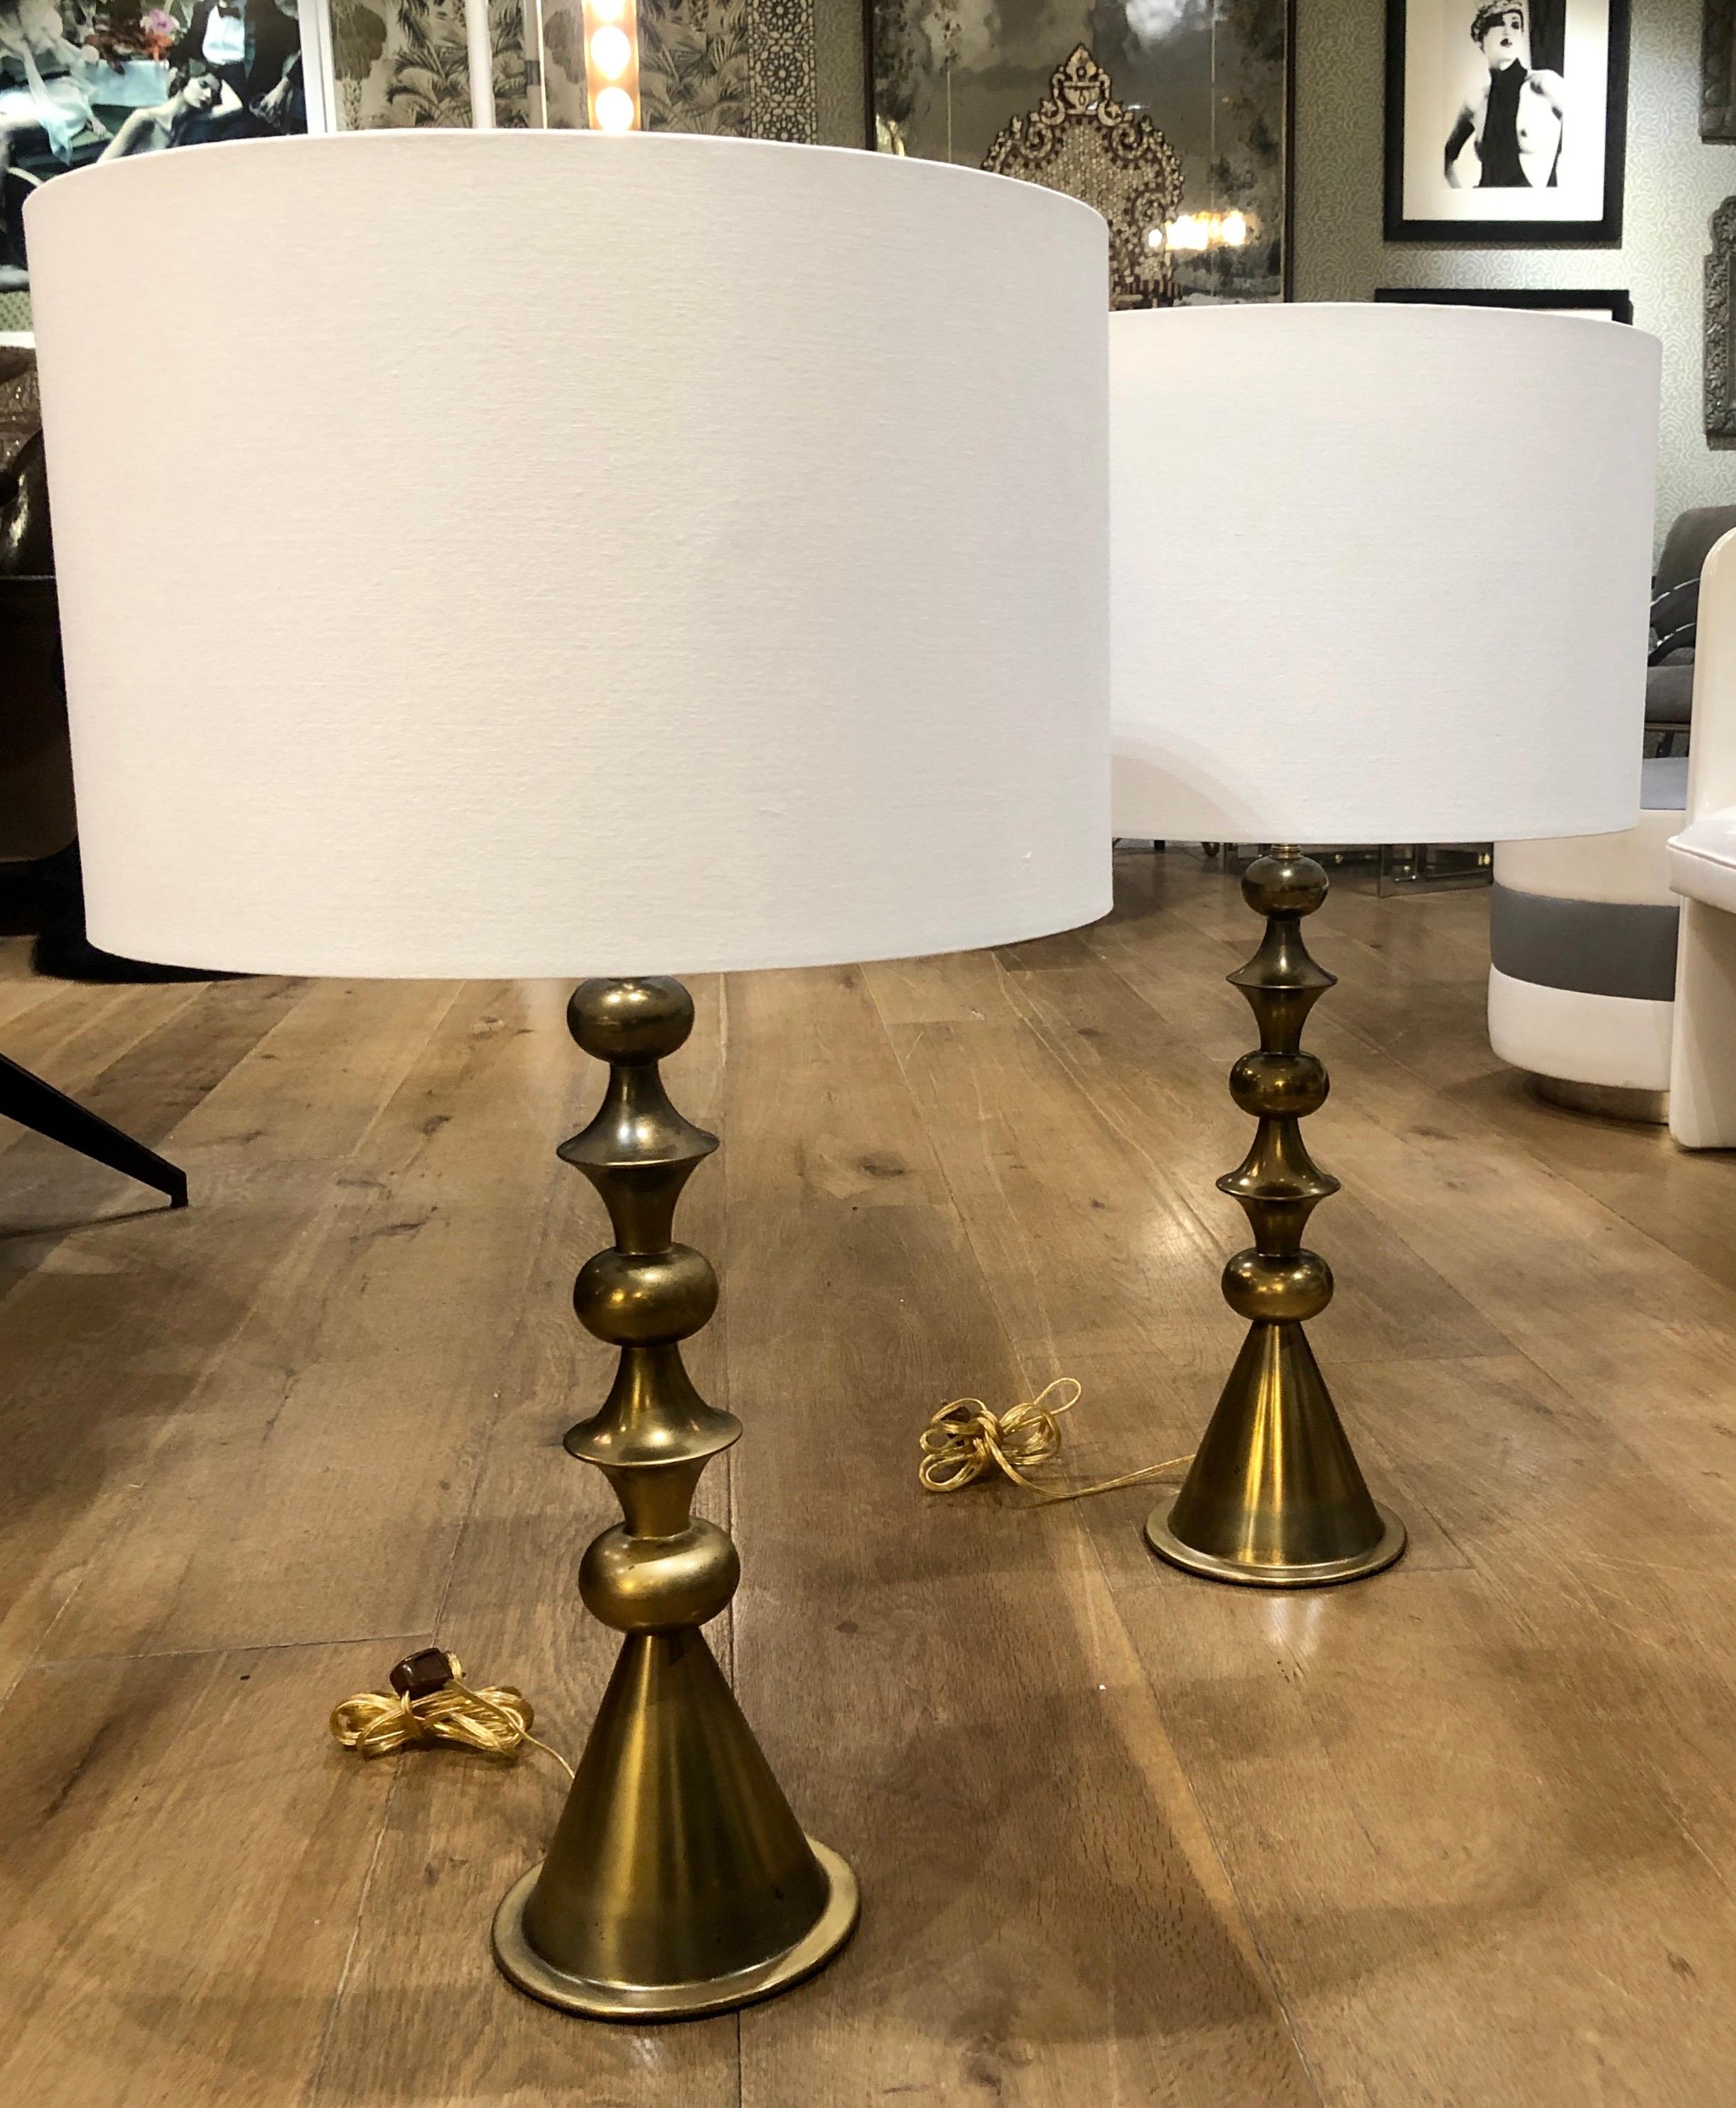 Pair of Mid-Century Modern brass table lamps in the manner of Tommi Parzinger.
Adjustable shade height.
Rewired.